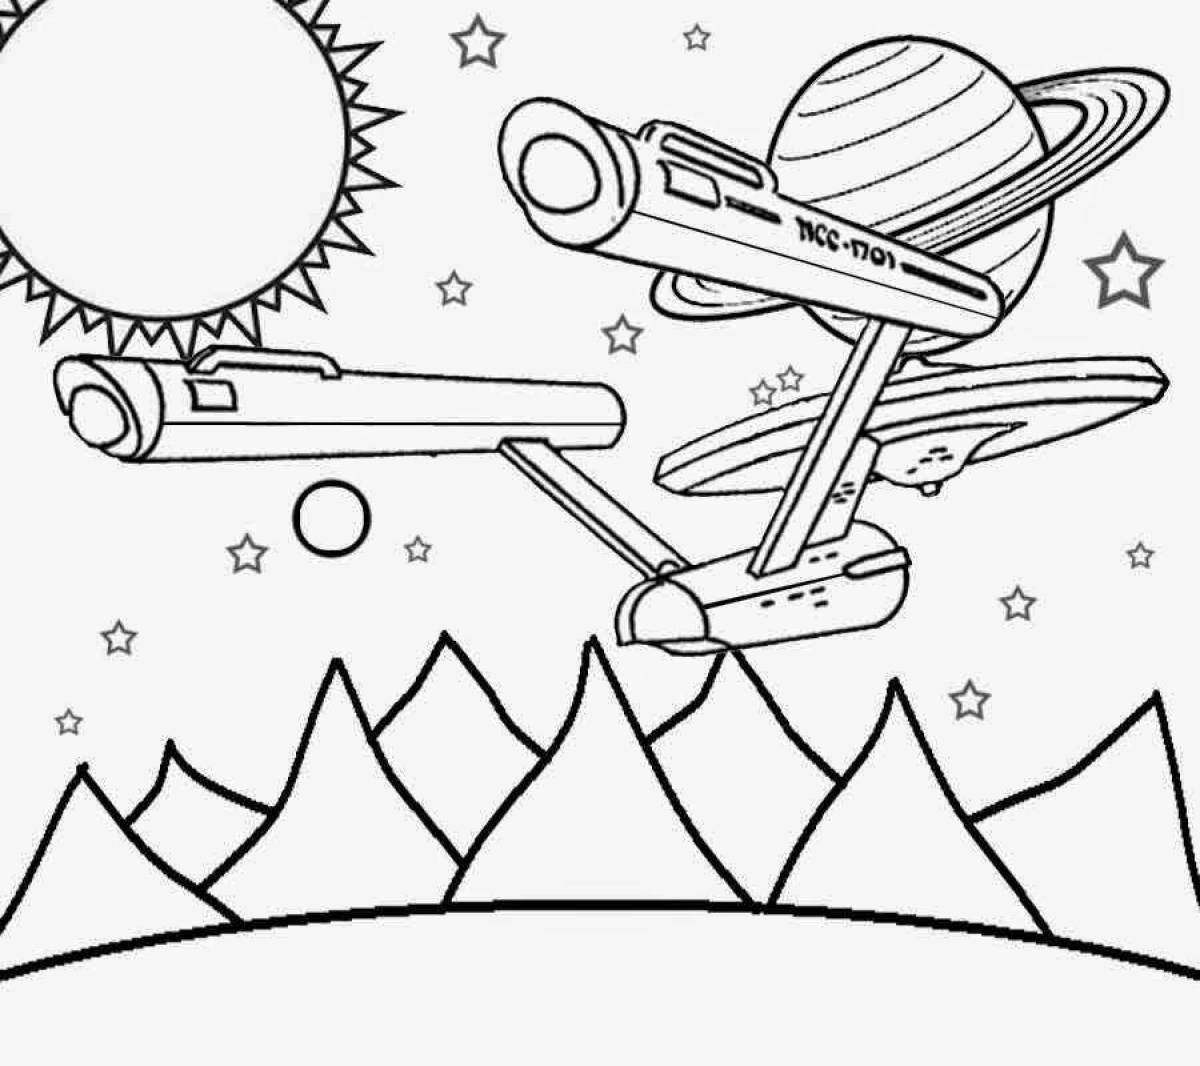 Colorful intergalactic space coloring book